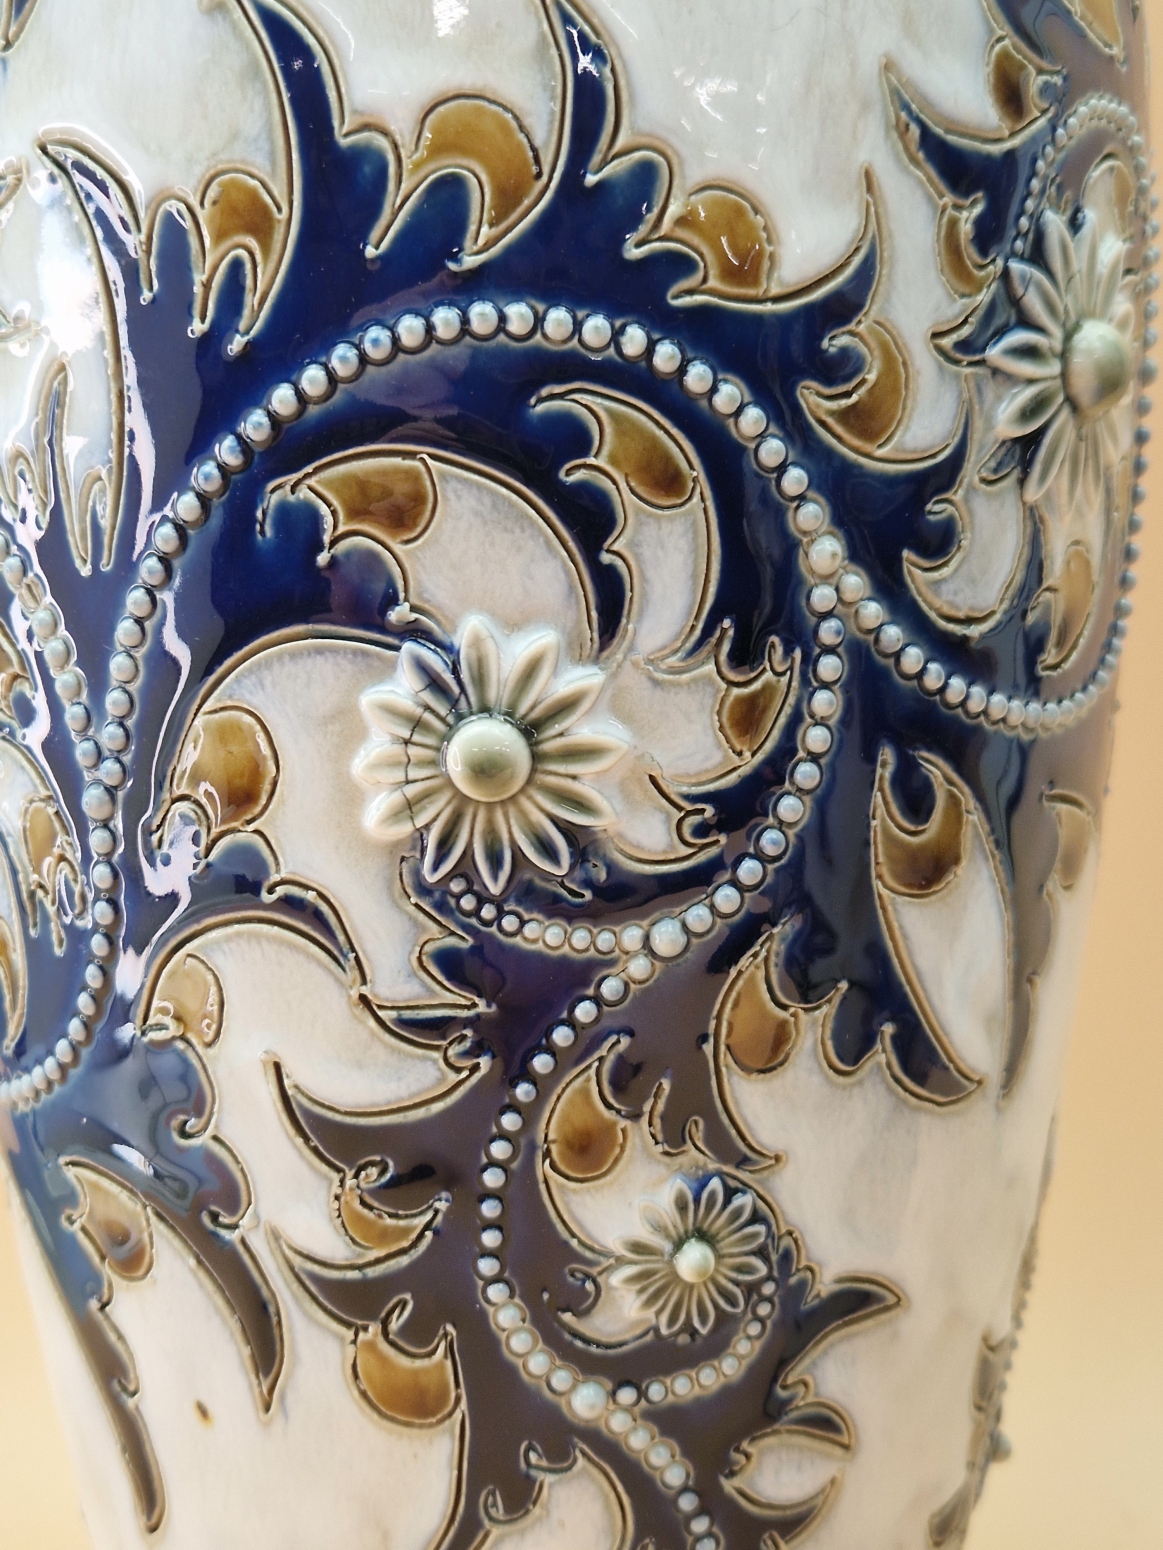 A PAIR OF ROYAL DOULTON VASES BY GEORGE TINWORTH DECORATED IN RELIEF WITH BEADED BLUE VINES - Image 7 of 8